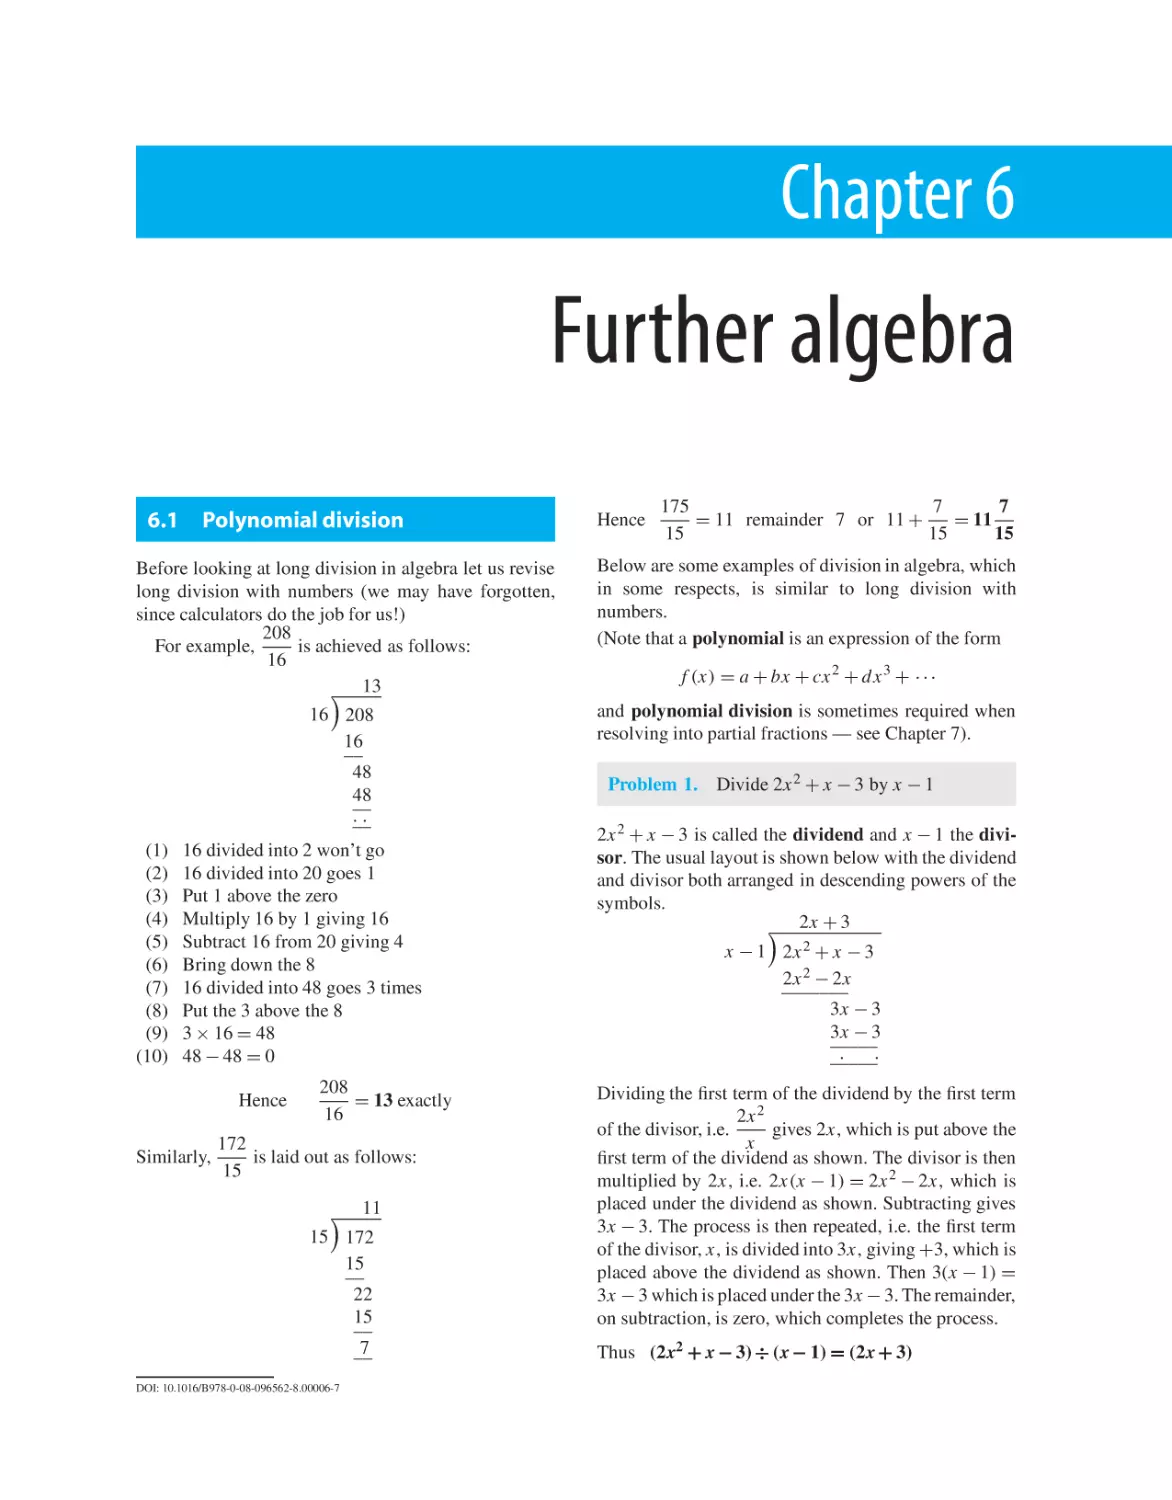 Chapter 6. Further algebra
6.1 Polynomial division